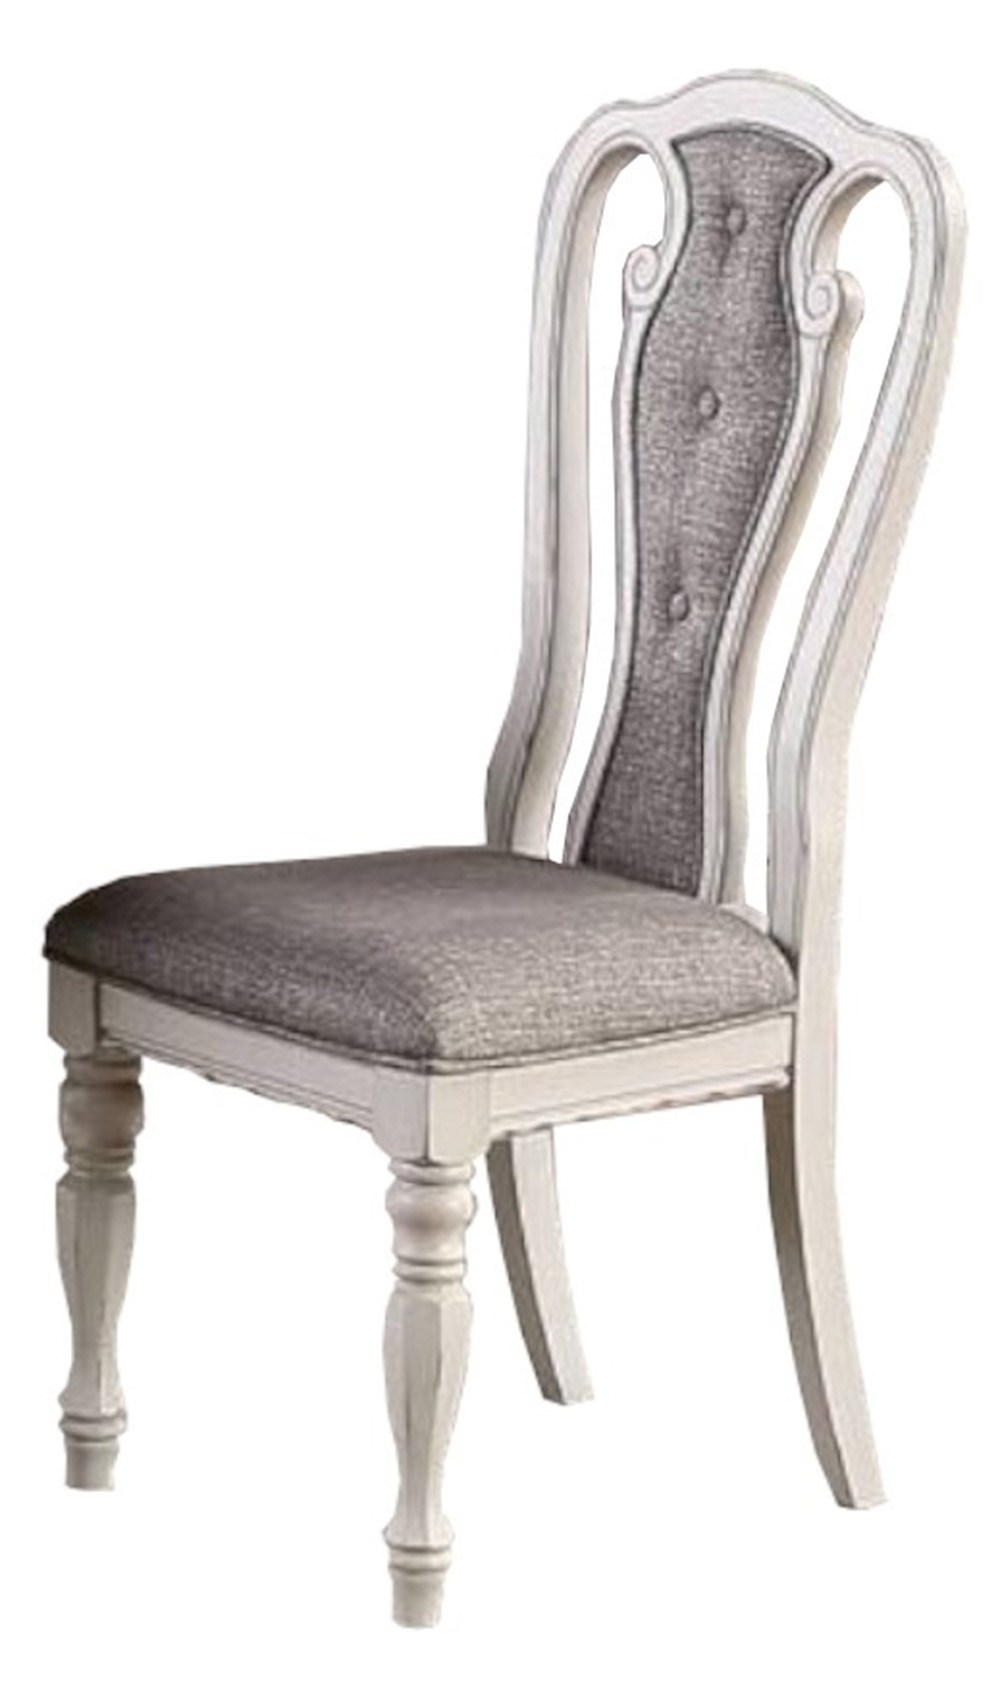 Upholstered Dining Chair Set of 2, with Tufted Backrest, and Wood Legs, for Restaurant, Cafe, Tavern, Office, Living Room - Gray